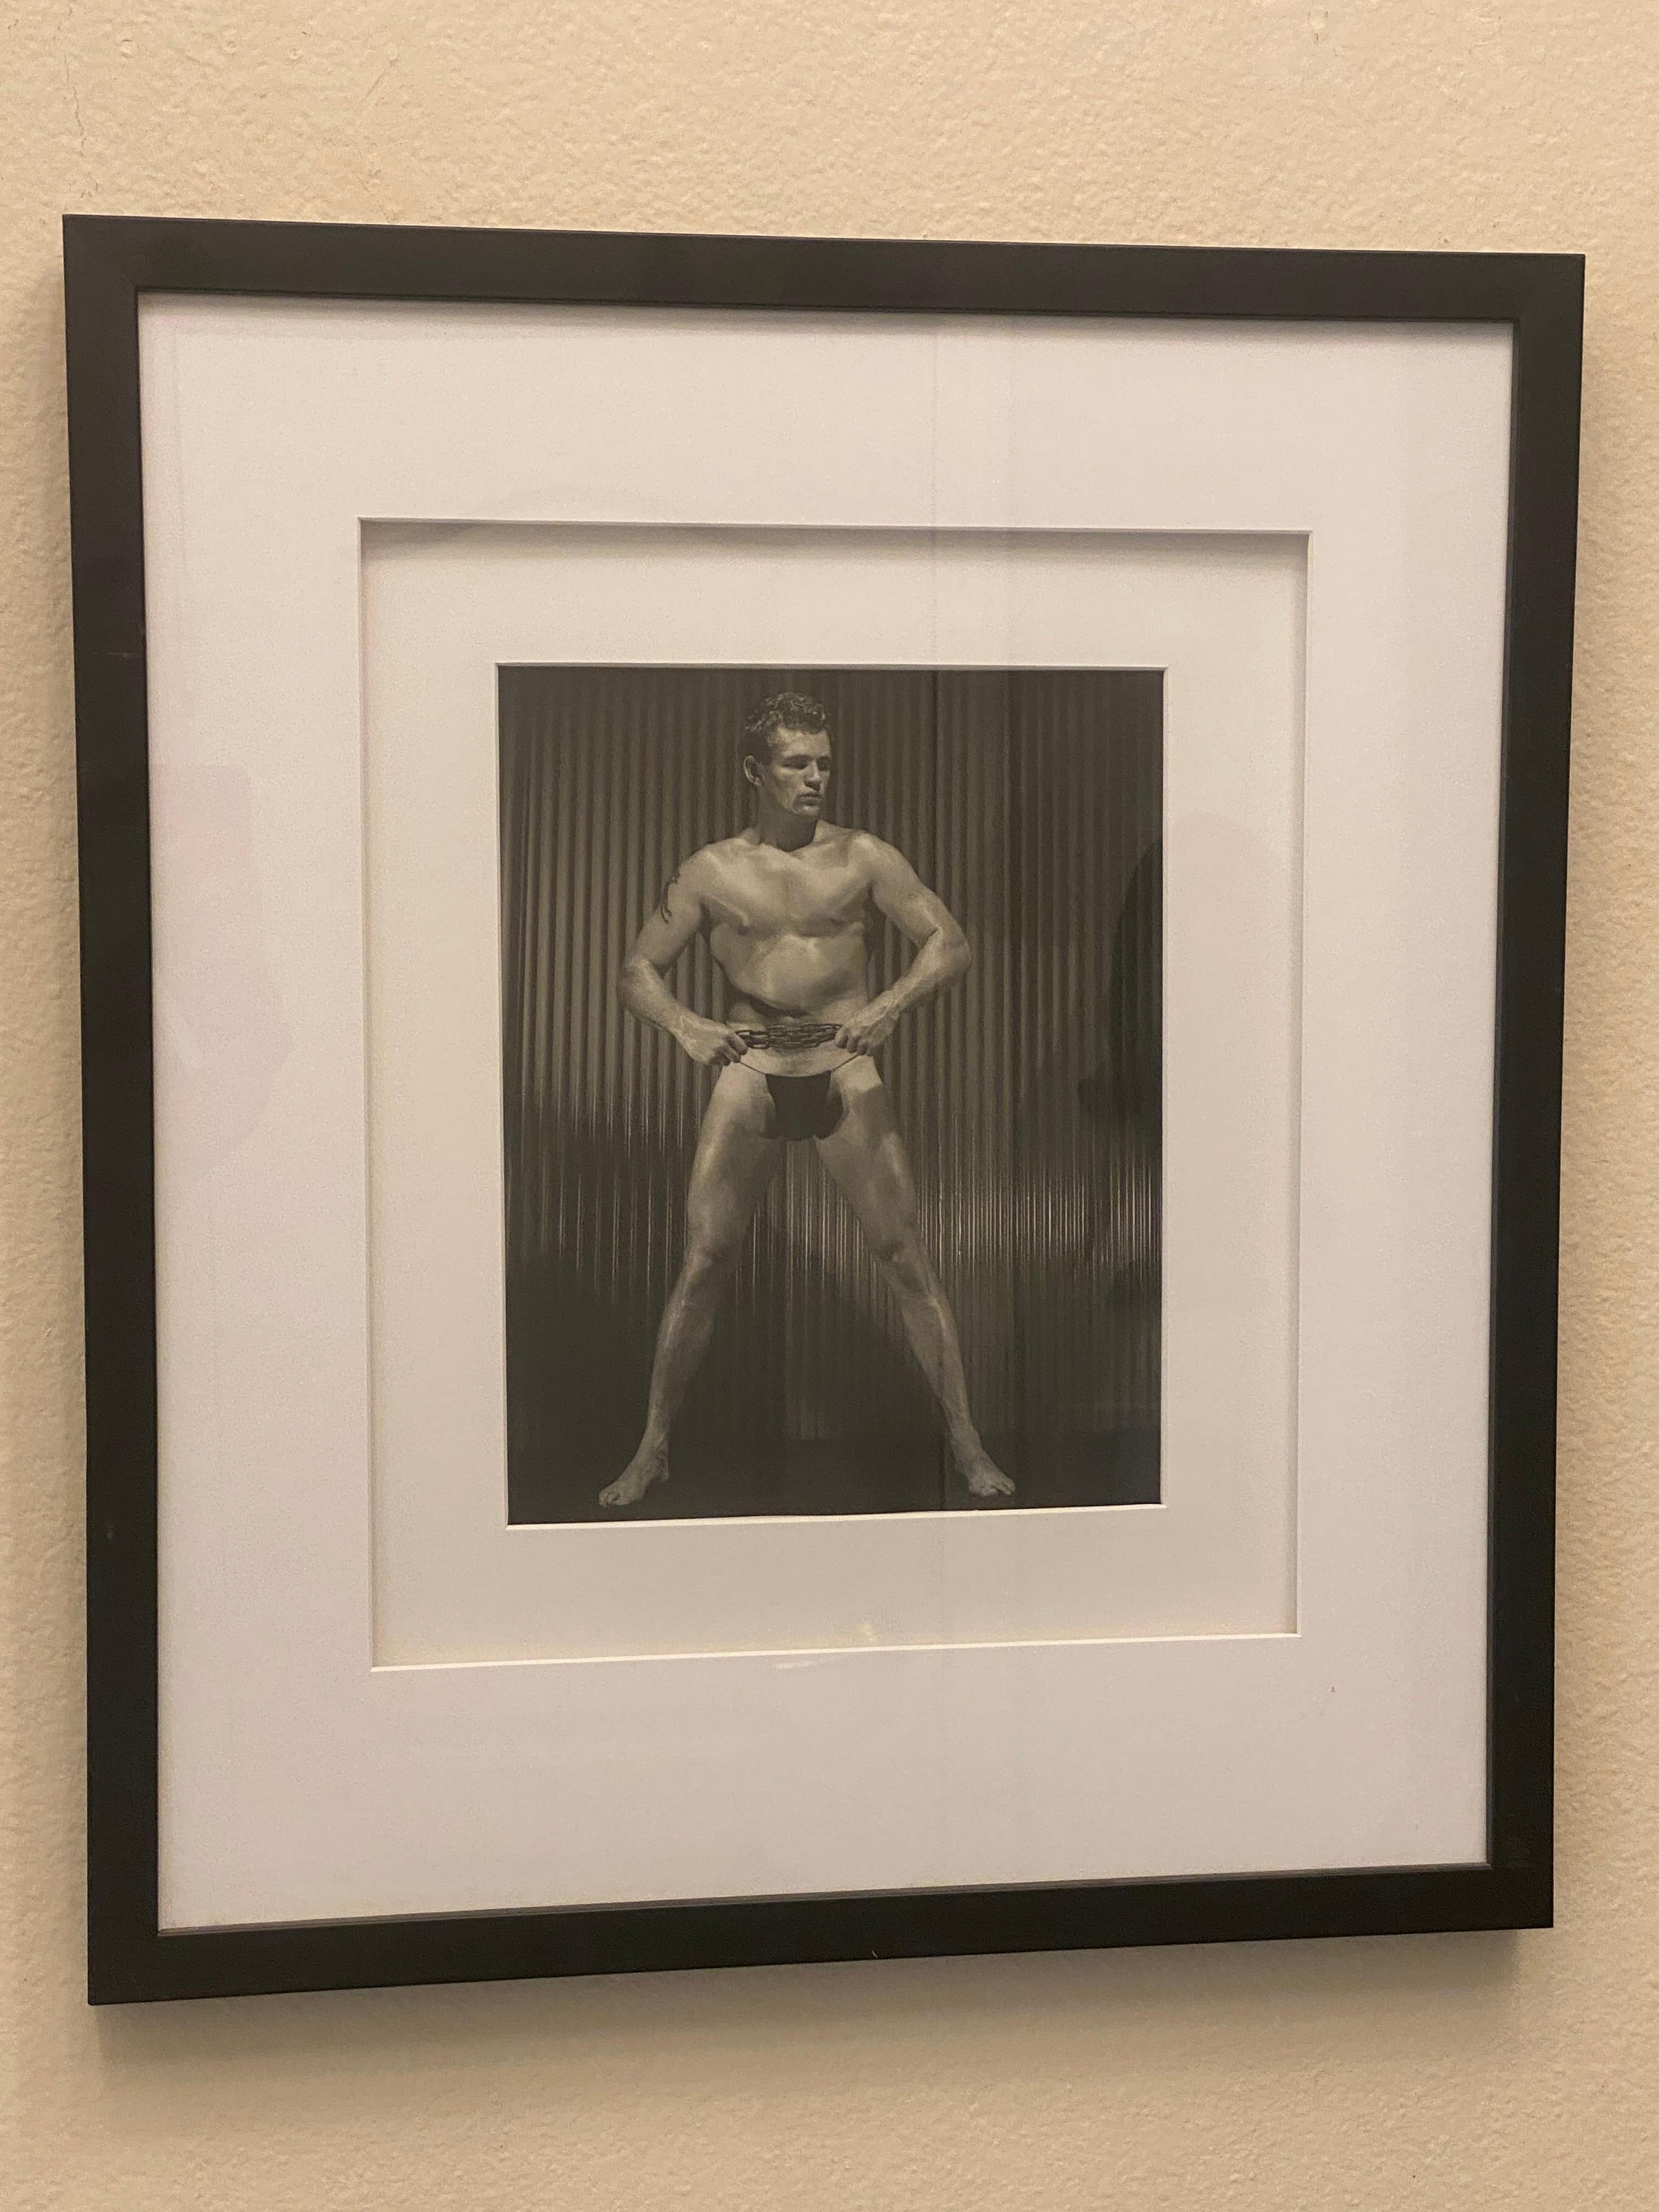 Hand-Crafted Bruce of L.A. (Bruce Bellas) Original 50s Male Nude Photograph Masculine Model For Sale